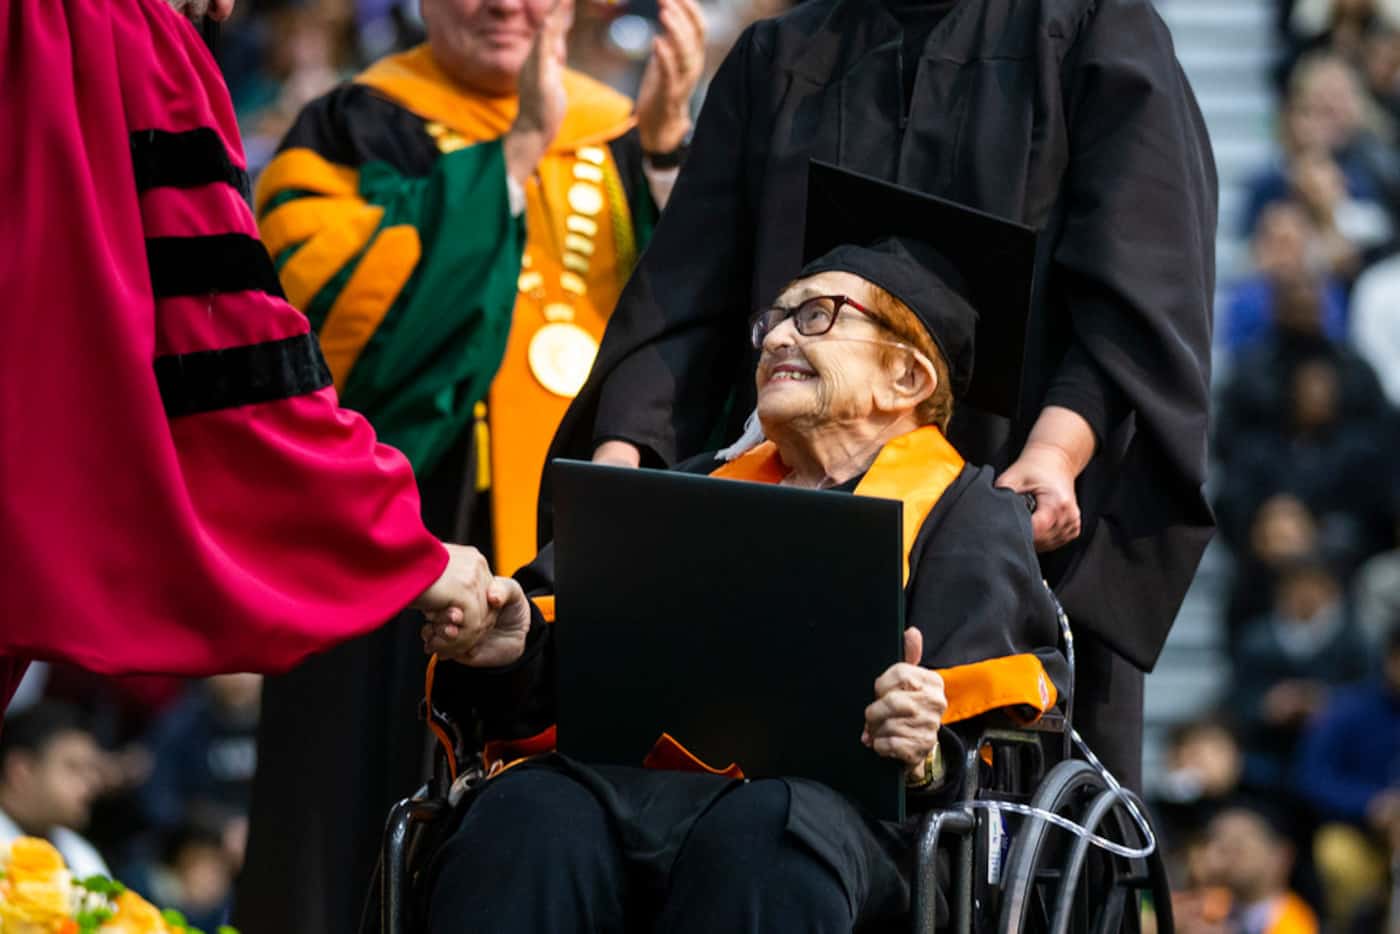 Janet Fein, 84, beamed as she crosses the stage during a commencement ceremony at UT Dallas...